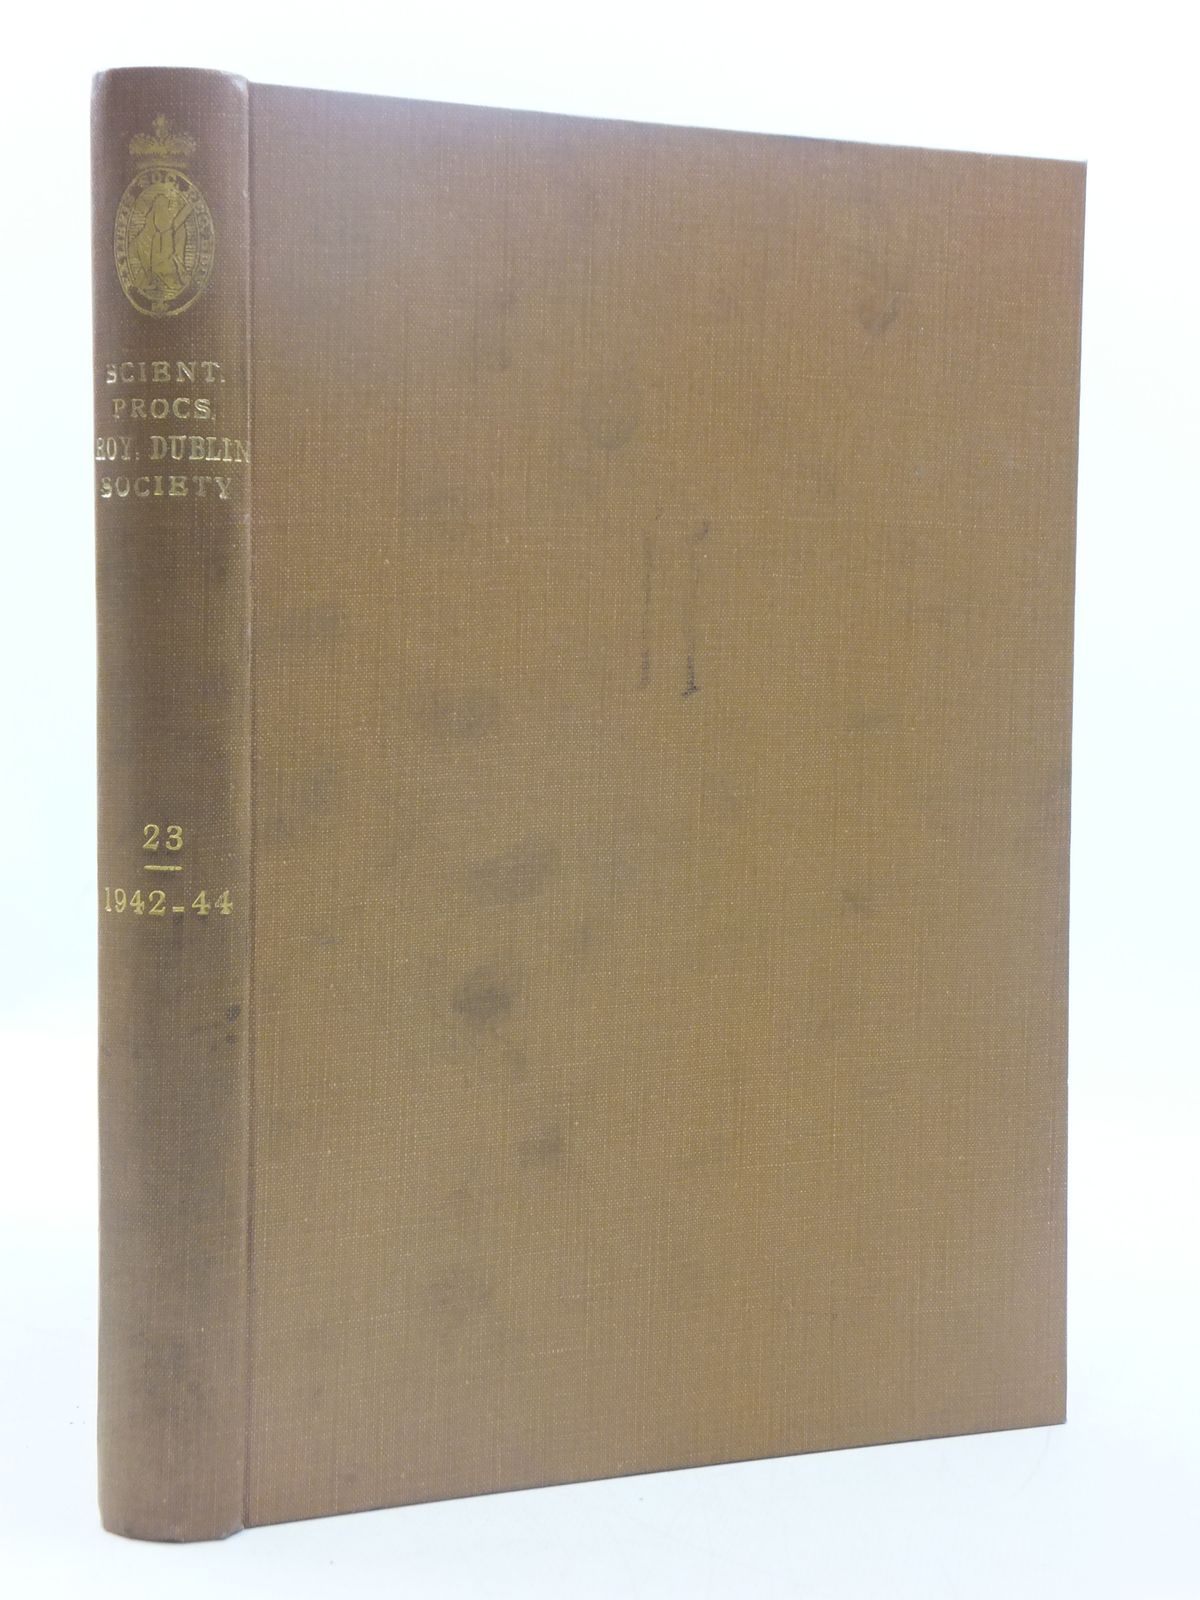 Photo of THE SCIENTIFIC PROCEEDINGS OF THE ROYAL DUBLIN SOCIETY VOLUME 23 (1942-44) published by Royal Dublin Society (STOCK CODE: 1605205)  for sale by Stella & Rose's Books